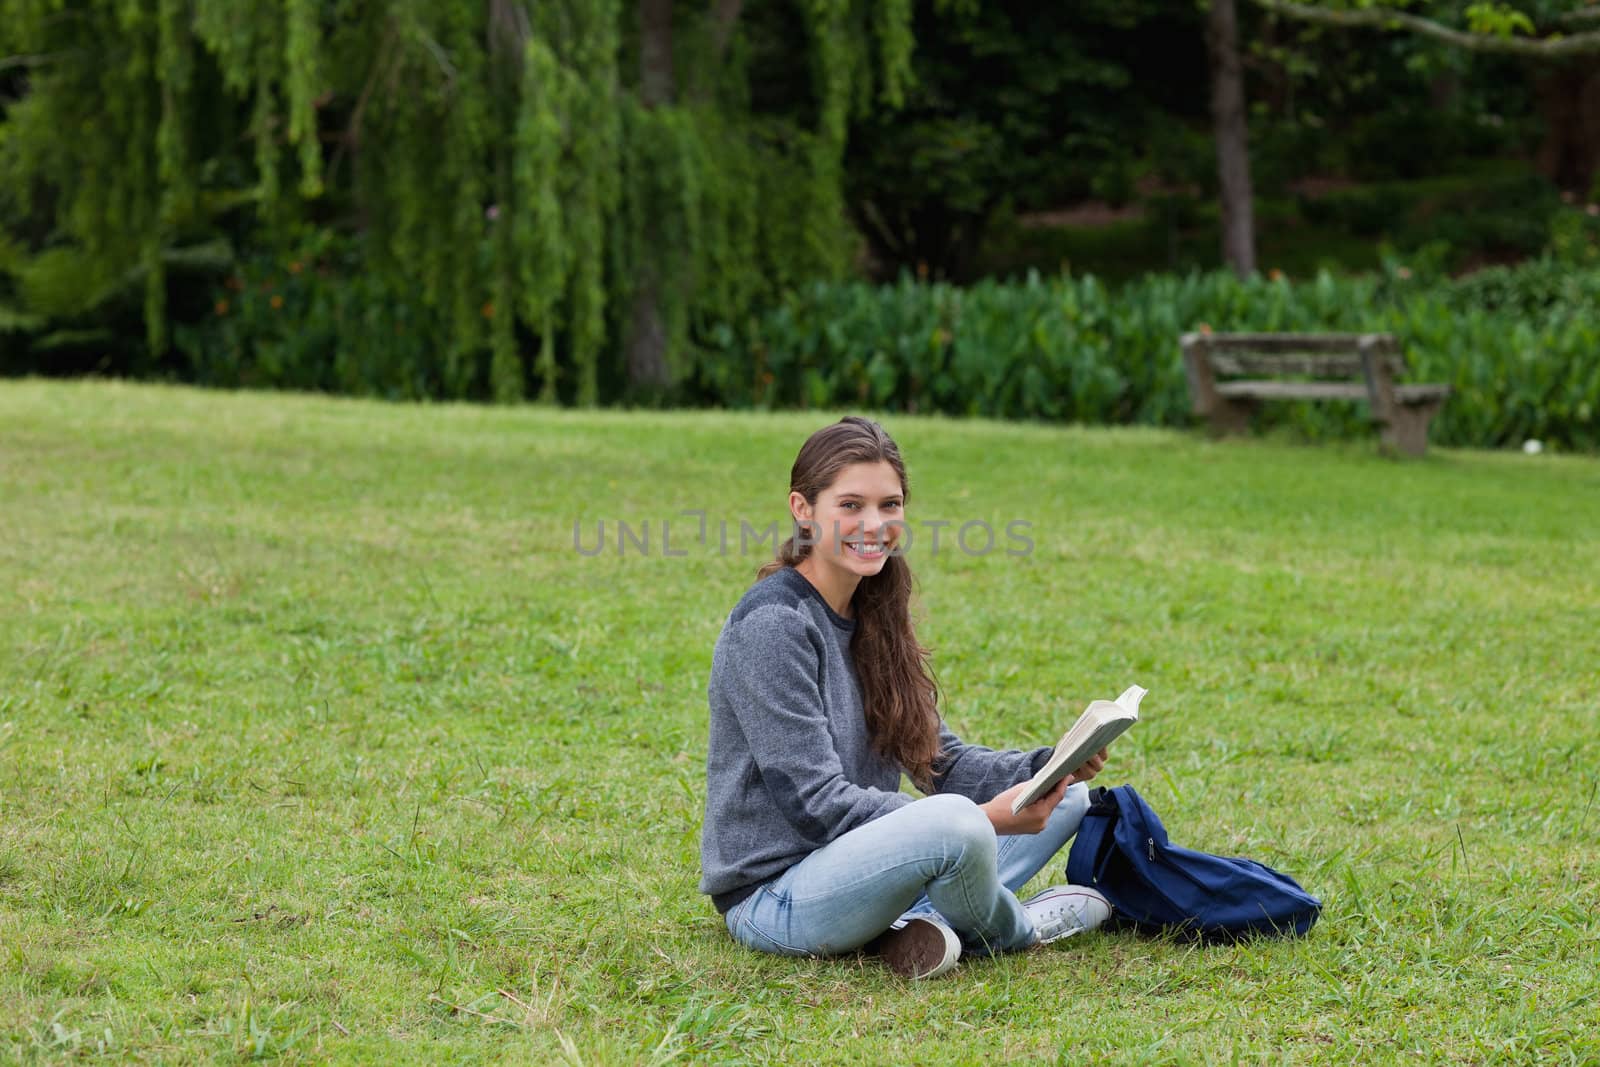 Smiling young adult reading a book while sitting cross-legged on the grass in a park